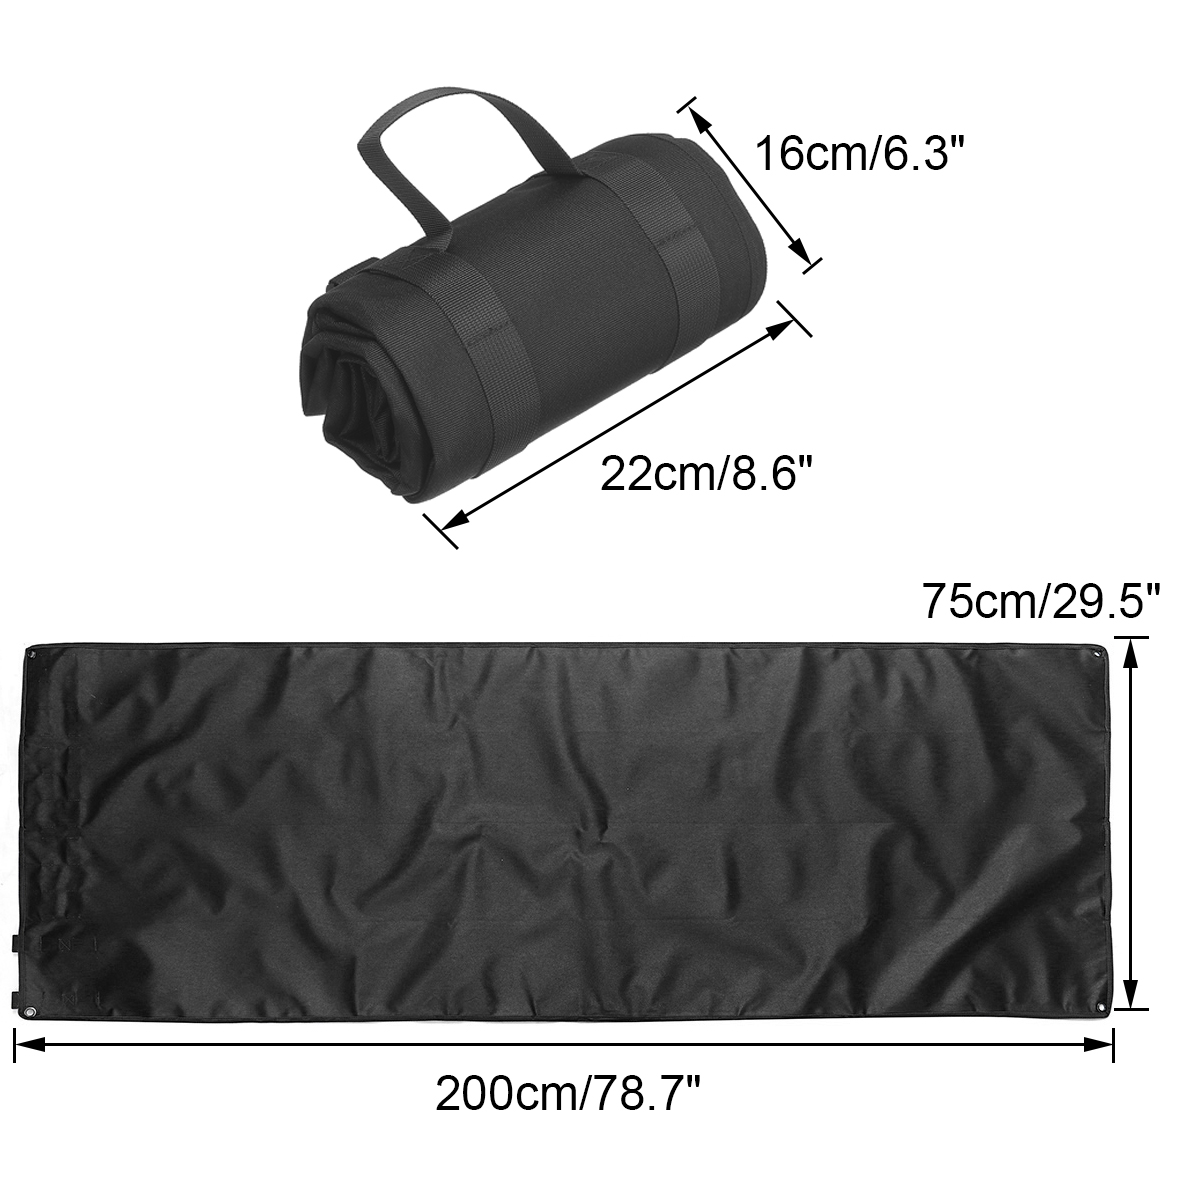 Picnic-Camping-Mat-Foldable-Roll-Up-Mat-Foldable-Portable-Non-Slip-Durable-Rest-Outdoor-Camping-Picn-1882342-7